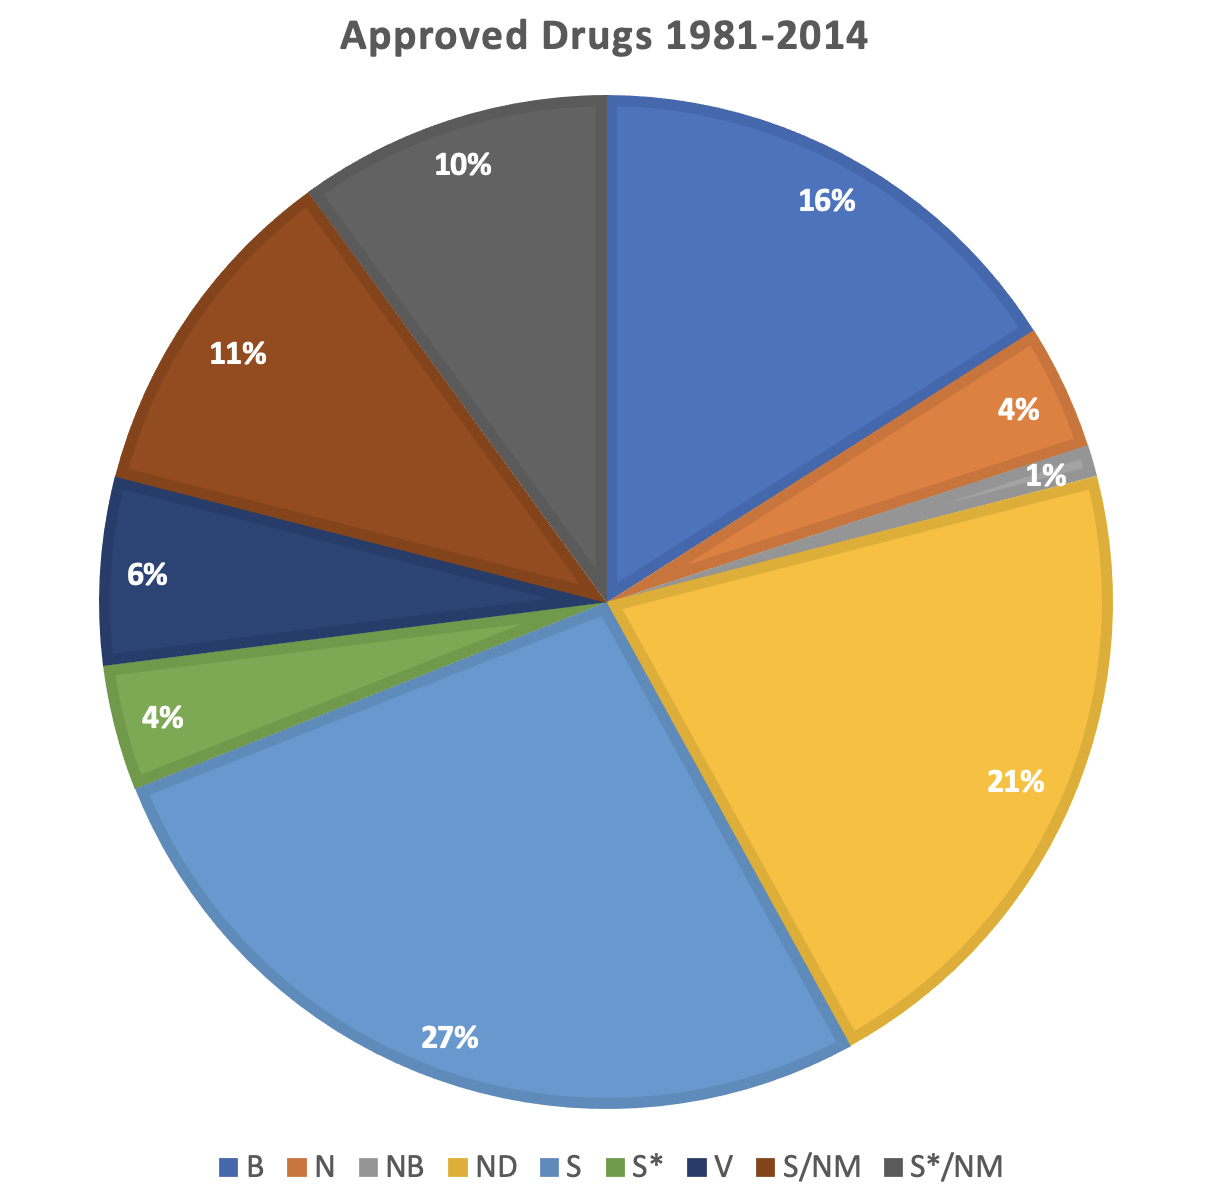 Pie chart showing percent of drugs that have a synthetic or natural sub-classification.